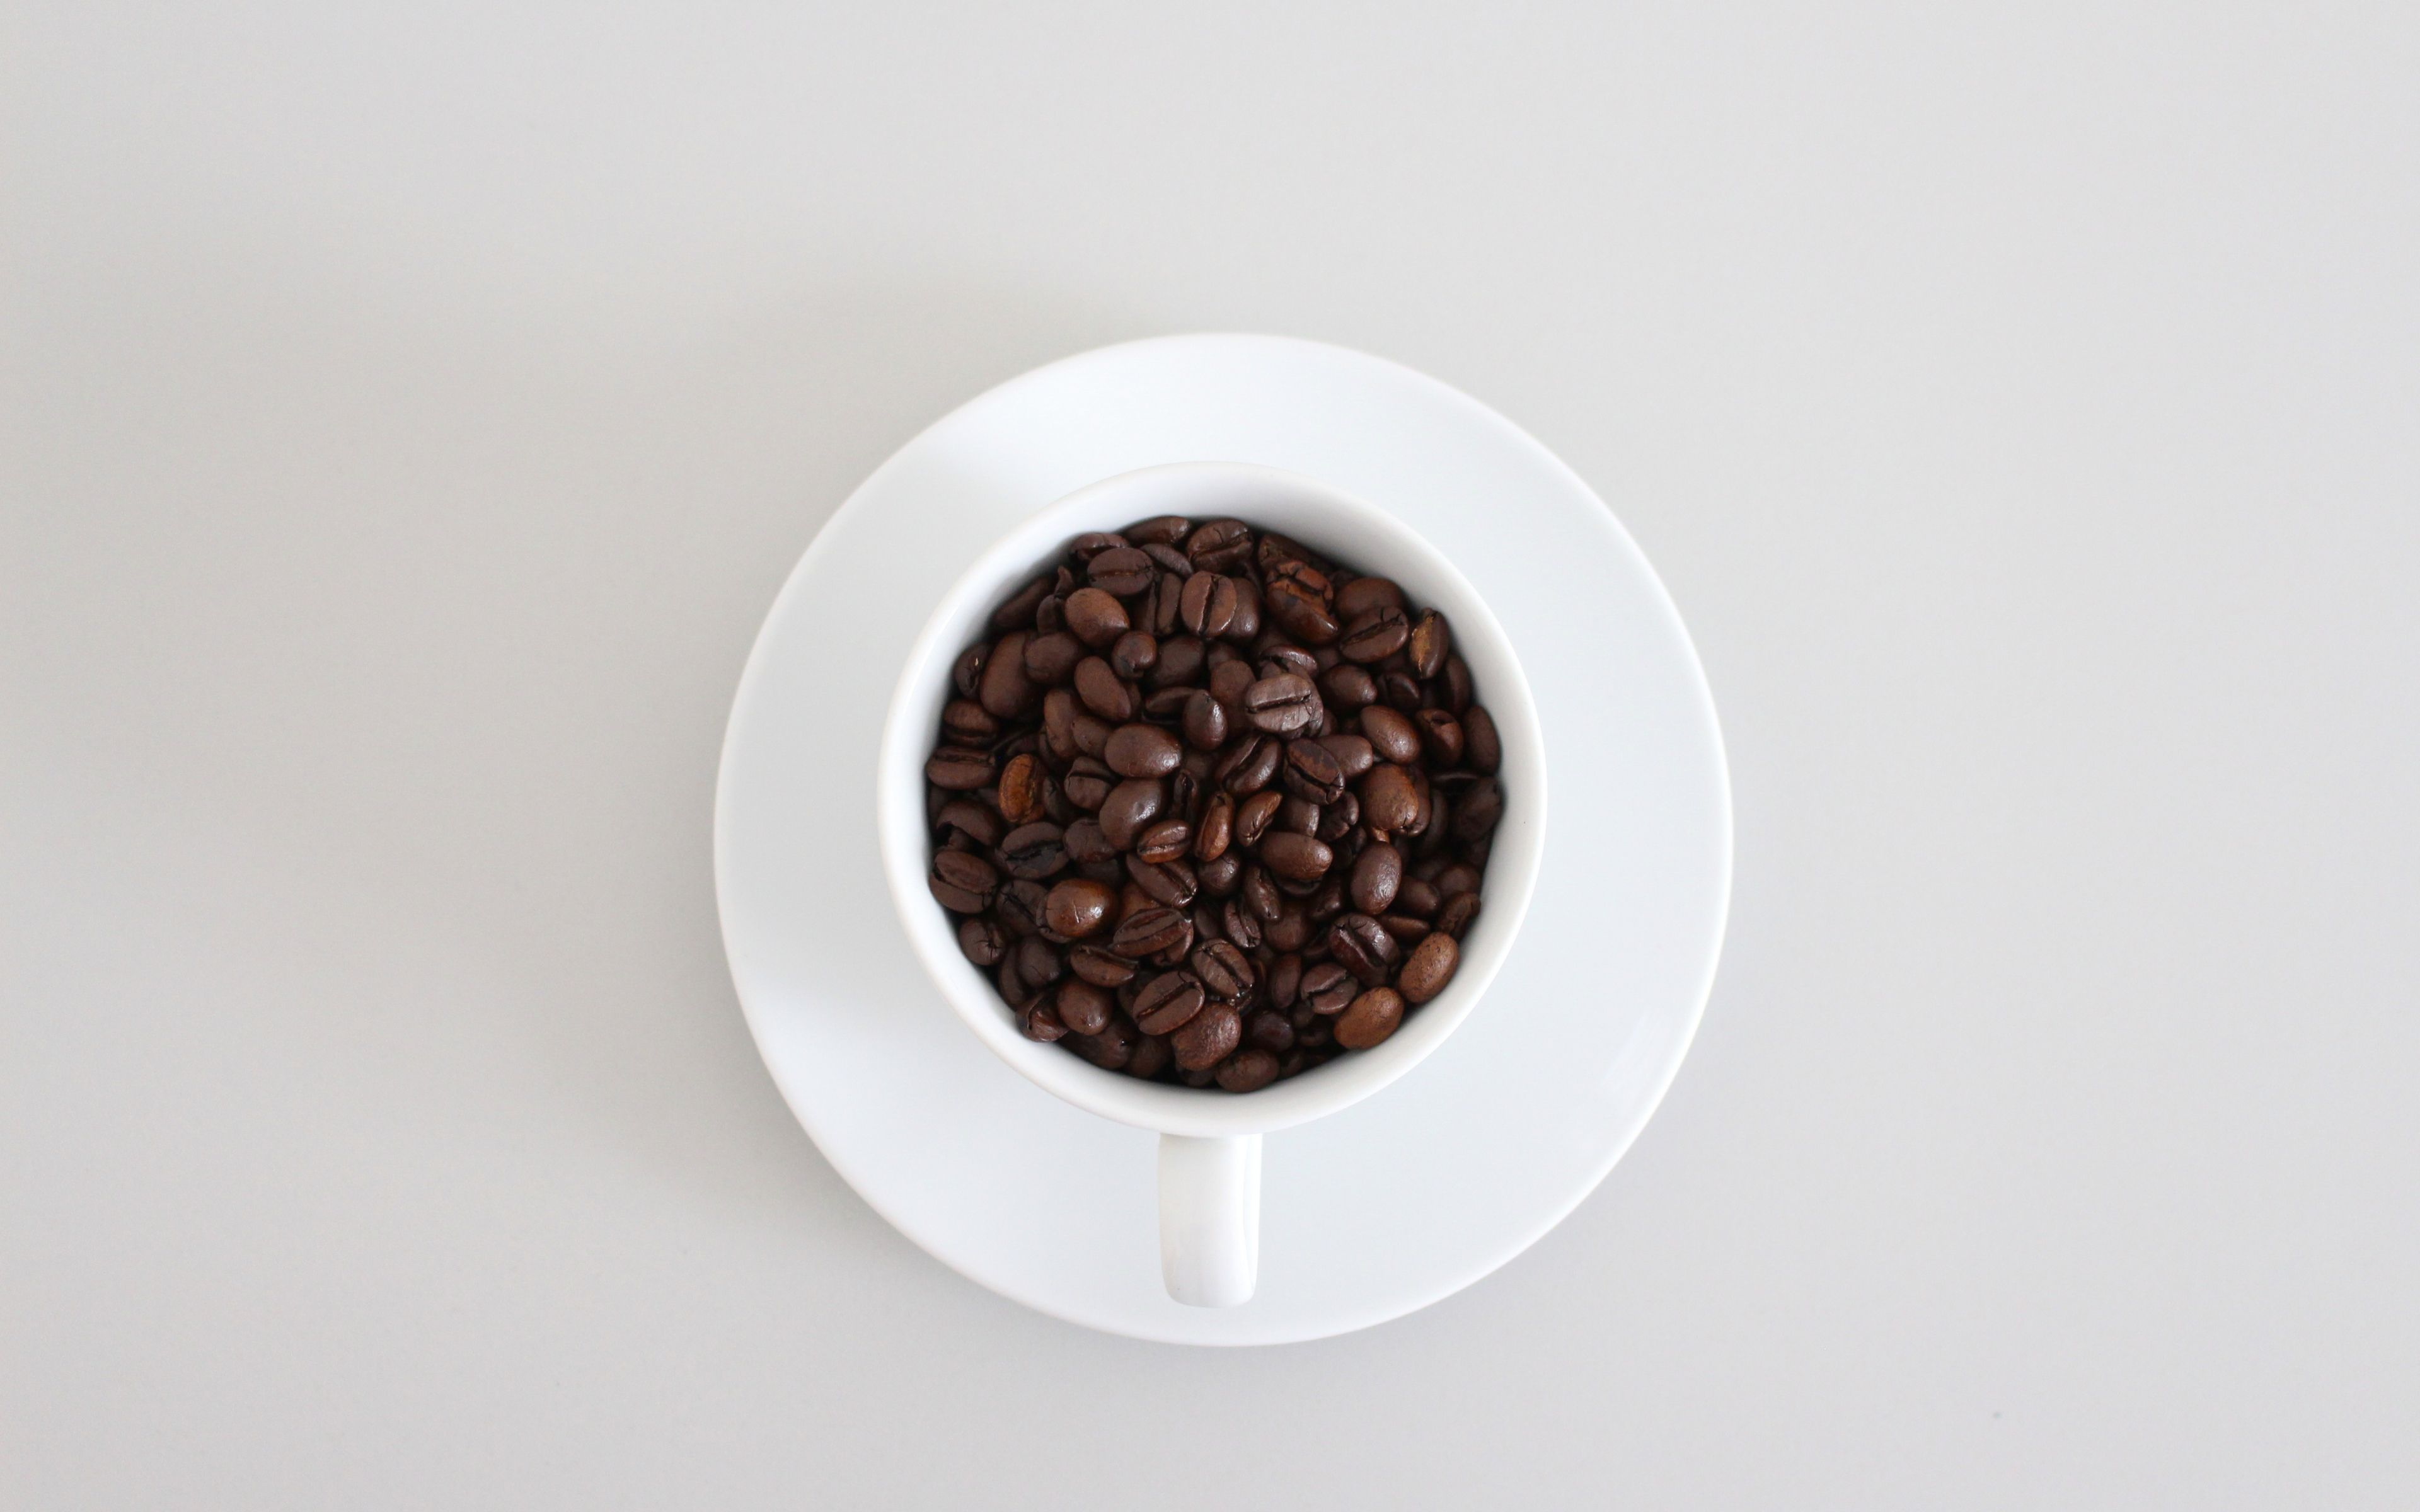 Download 3840x2400 wallpaper coffee beans, cup, 4k, ultra HD 16: widescreen, 3840x2400 HD image, background, 5476